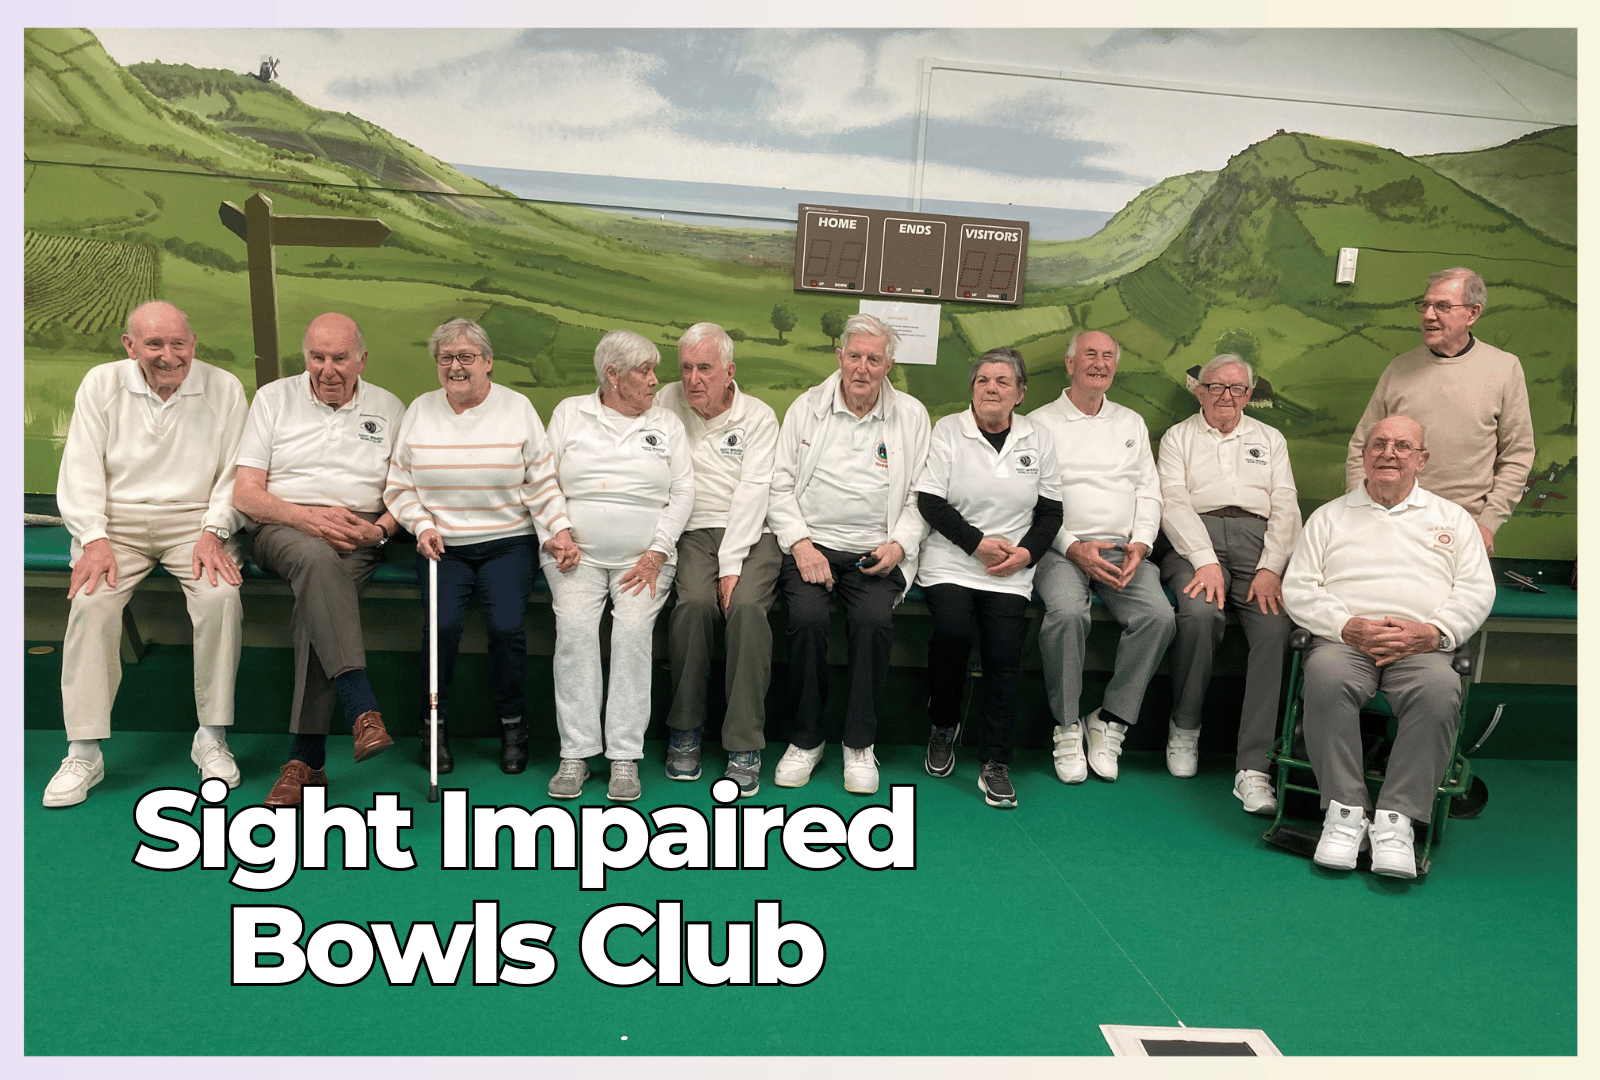 Members of the Bowls Club sitting on a bench posing for a photo with the text 'Sight Impaired Bowls Club' overlaid.